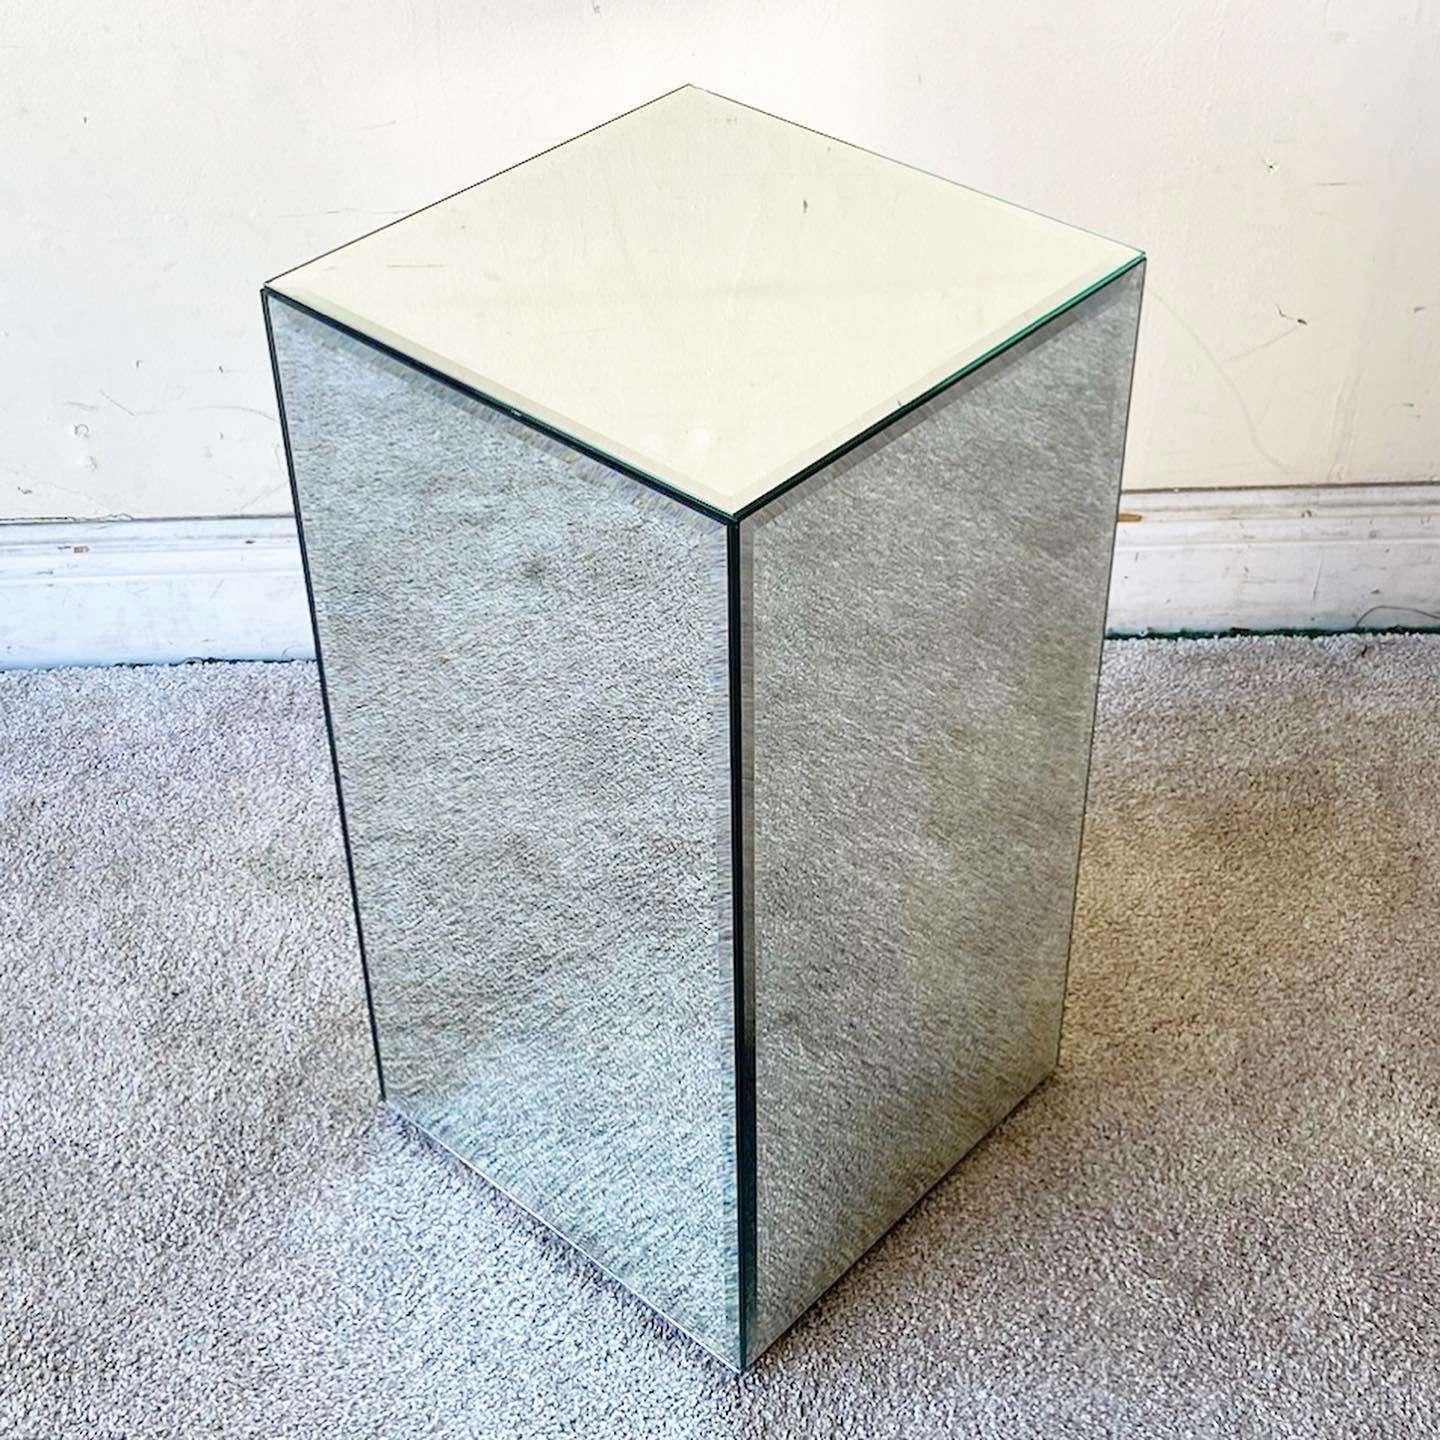 Amazing vintage Postmodern mirrored pedestal. Each side features a beveled mirror.